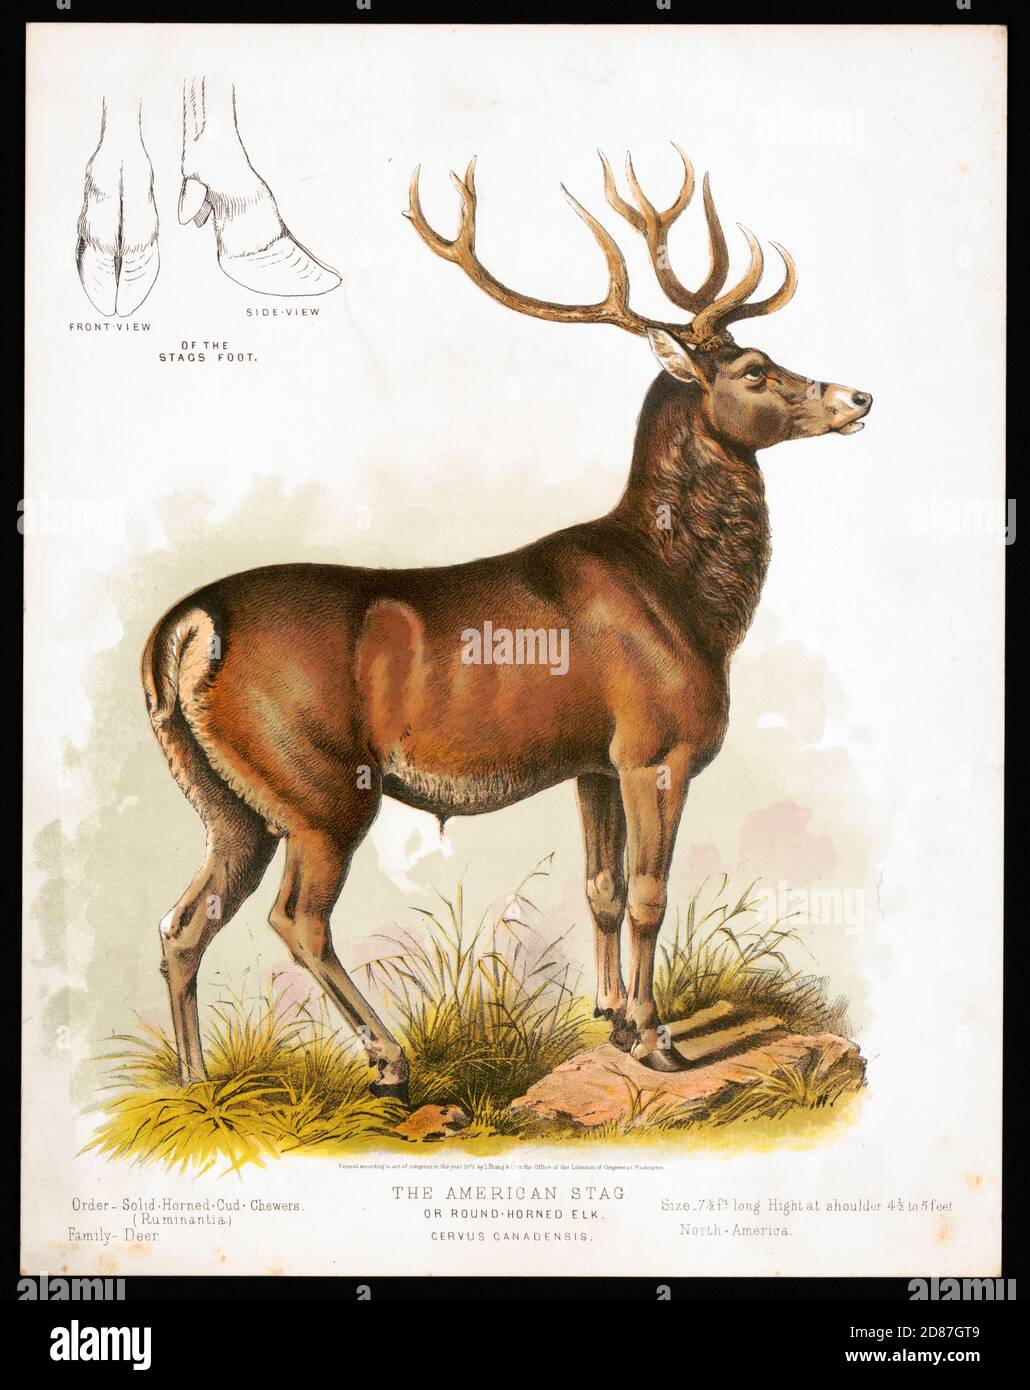 The American Stag Round Horned Elk 1872 Stock Photo